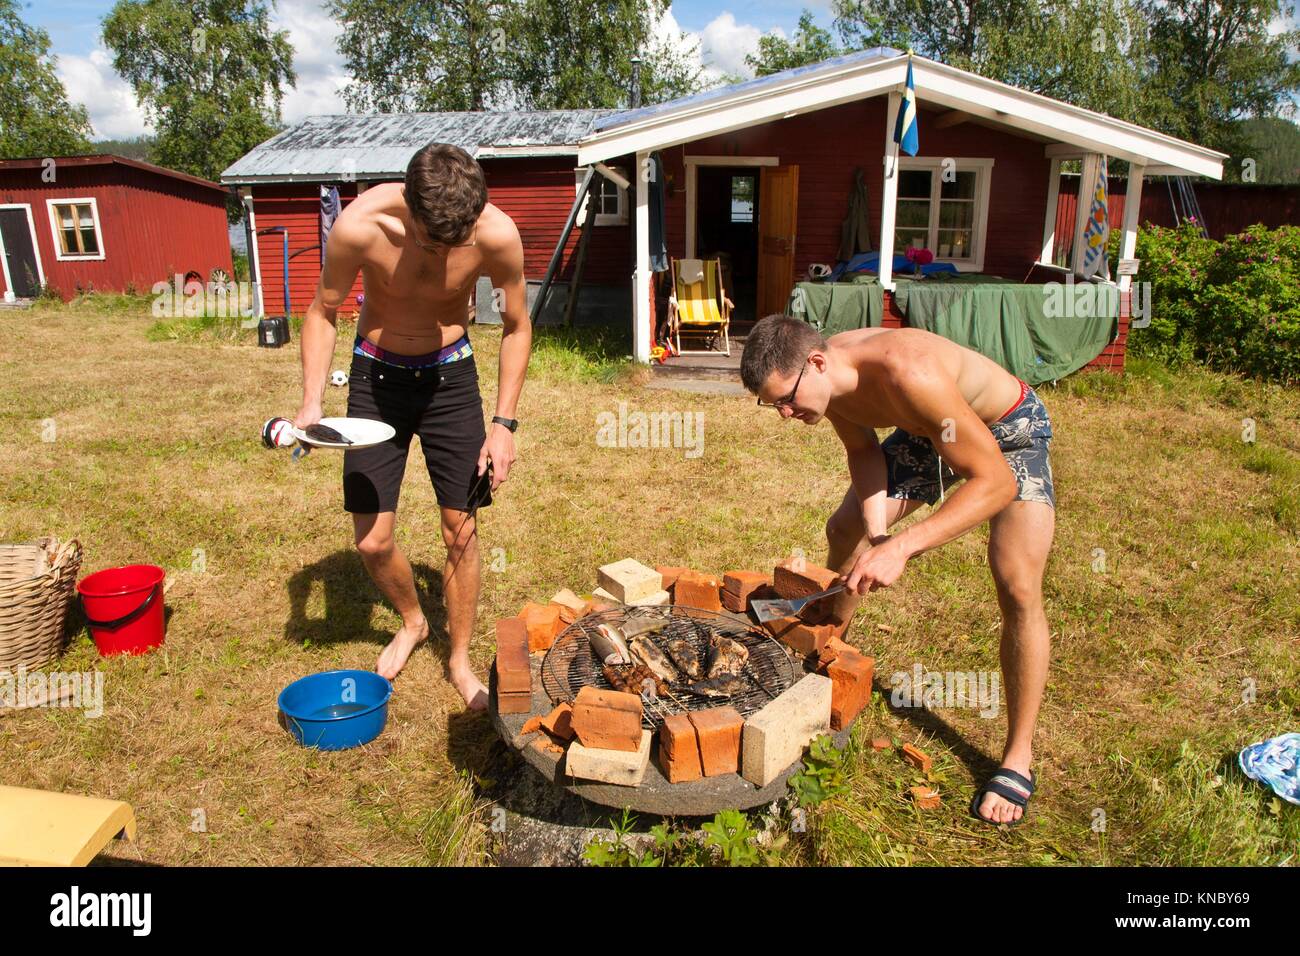 Brothers grilling fish, Northern Sweden. Stock Photo